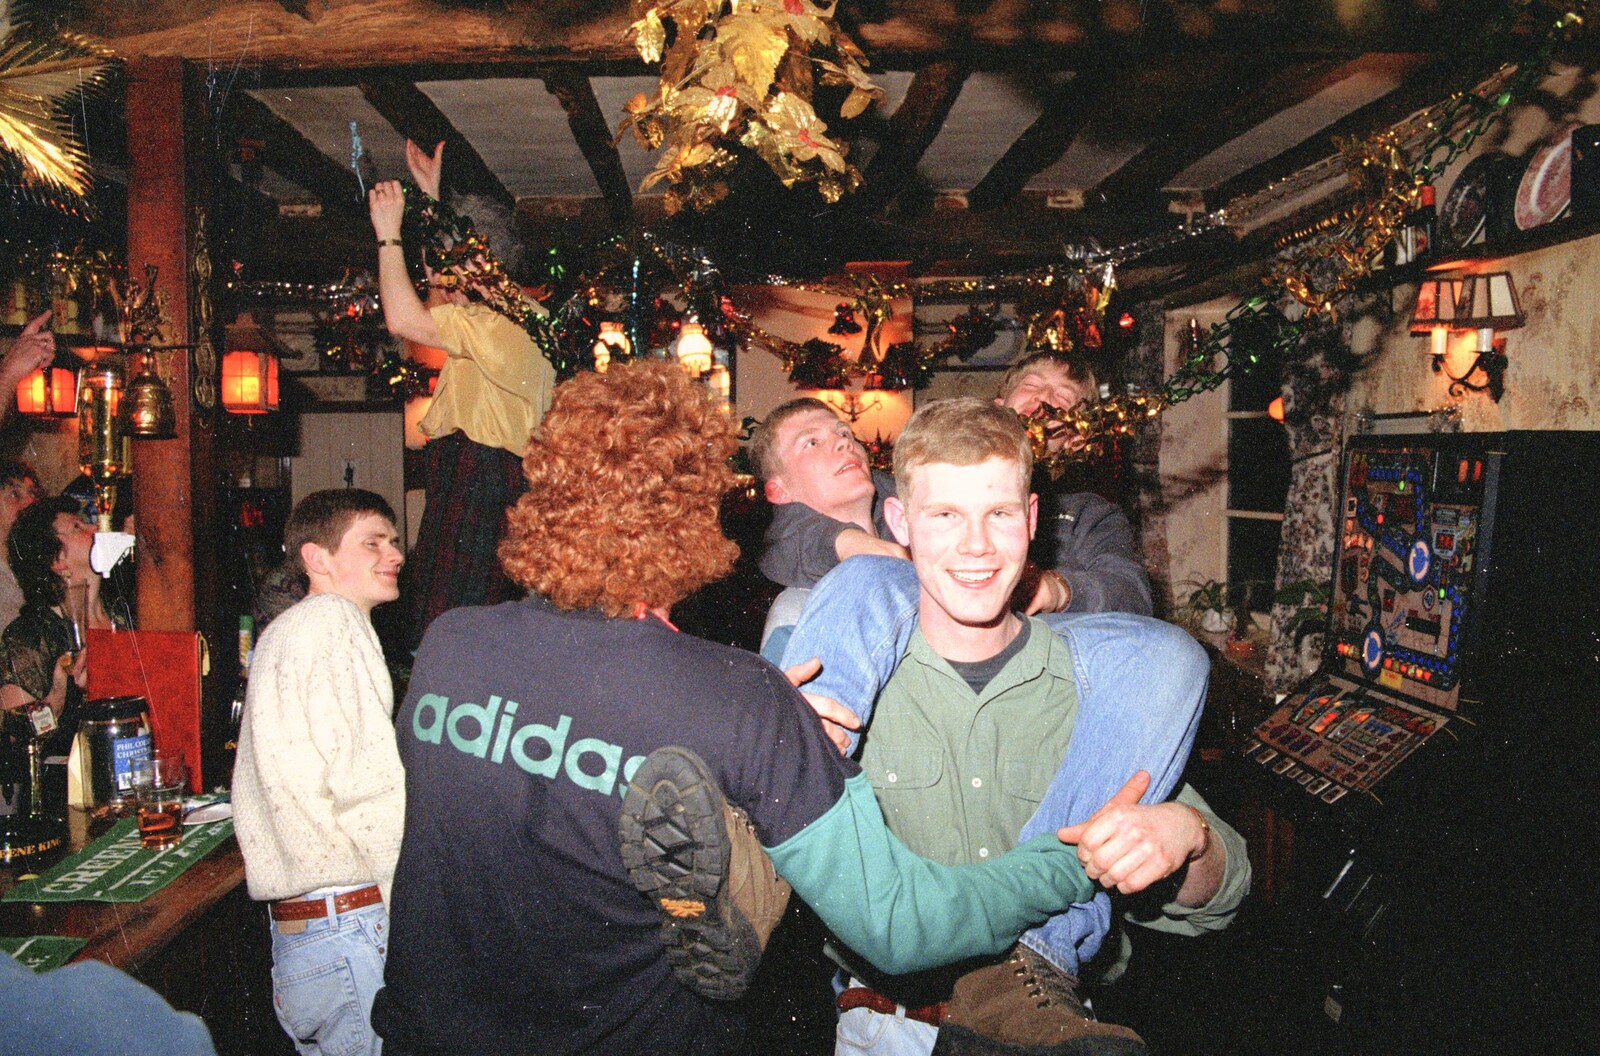 One of the lads is carried around from New Year's Eve at the Swan Inn, Brome, Suffolk - 31st December 1994